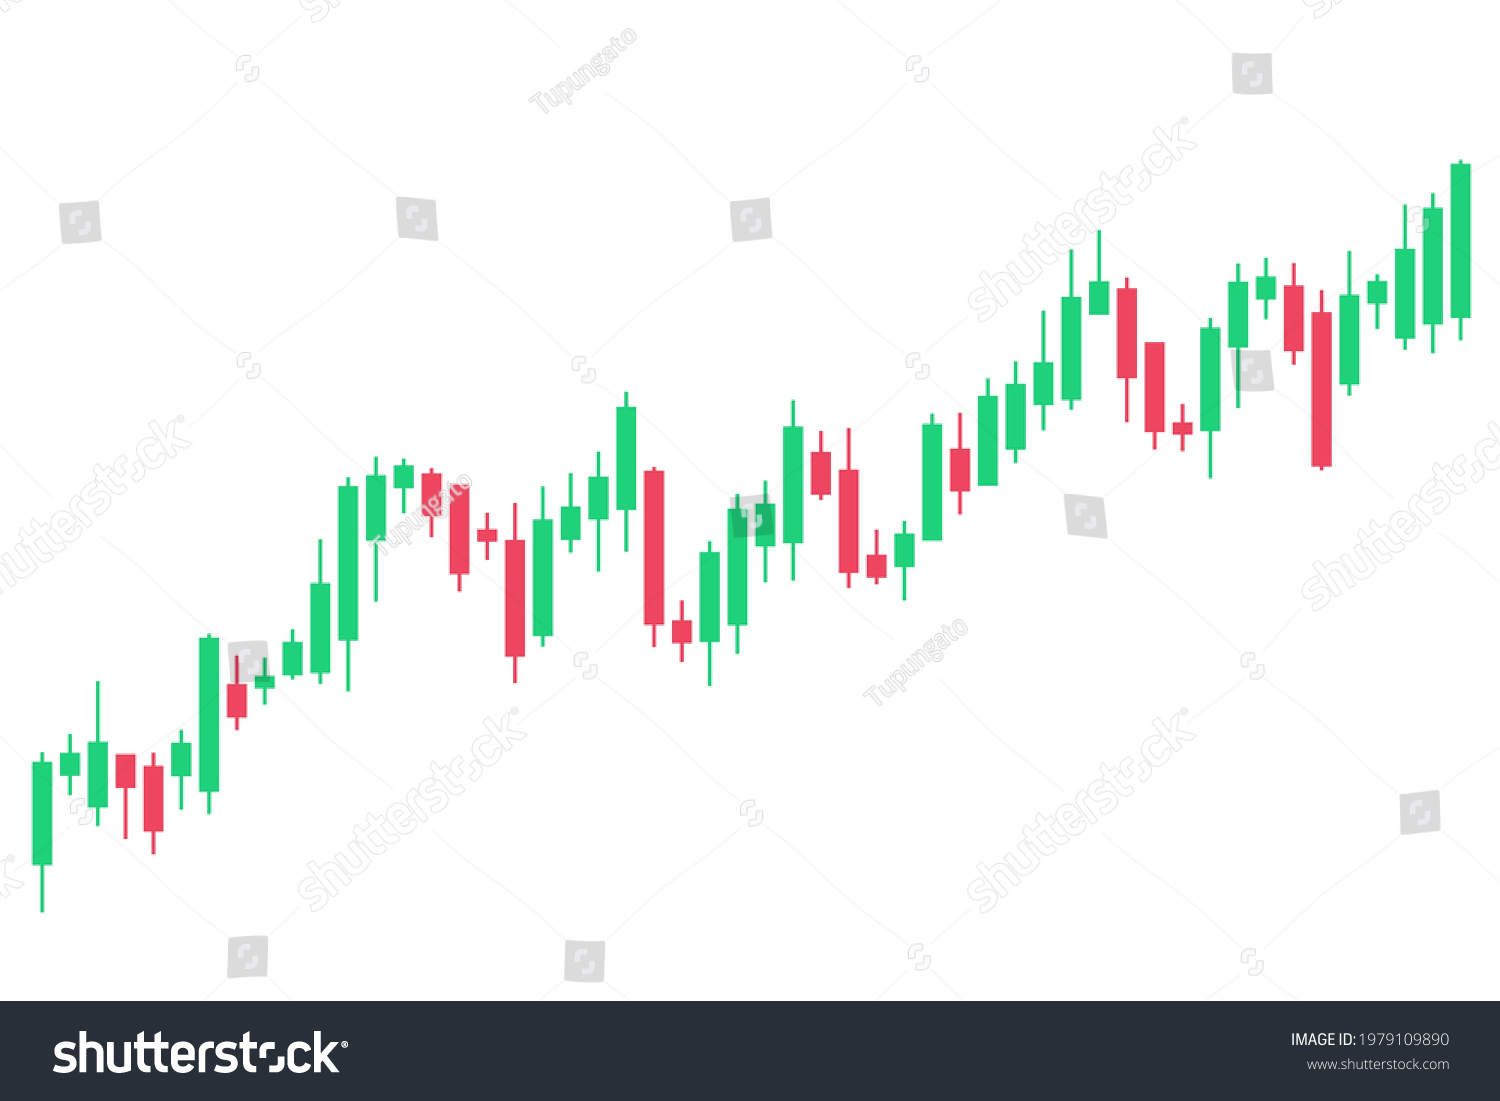 SVG of Candlestick chart (also called Japanese candlestick chart) for forex trading, stock exchange and crypto price analysis. svg